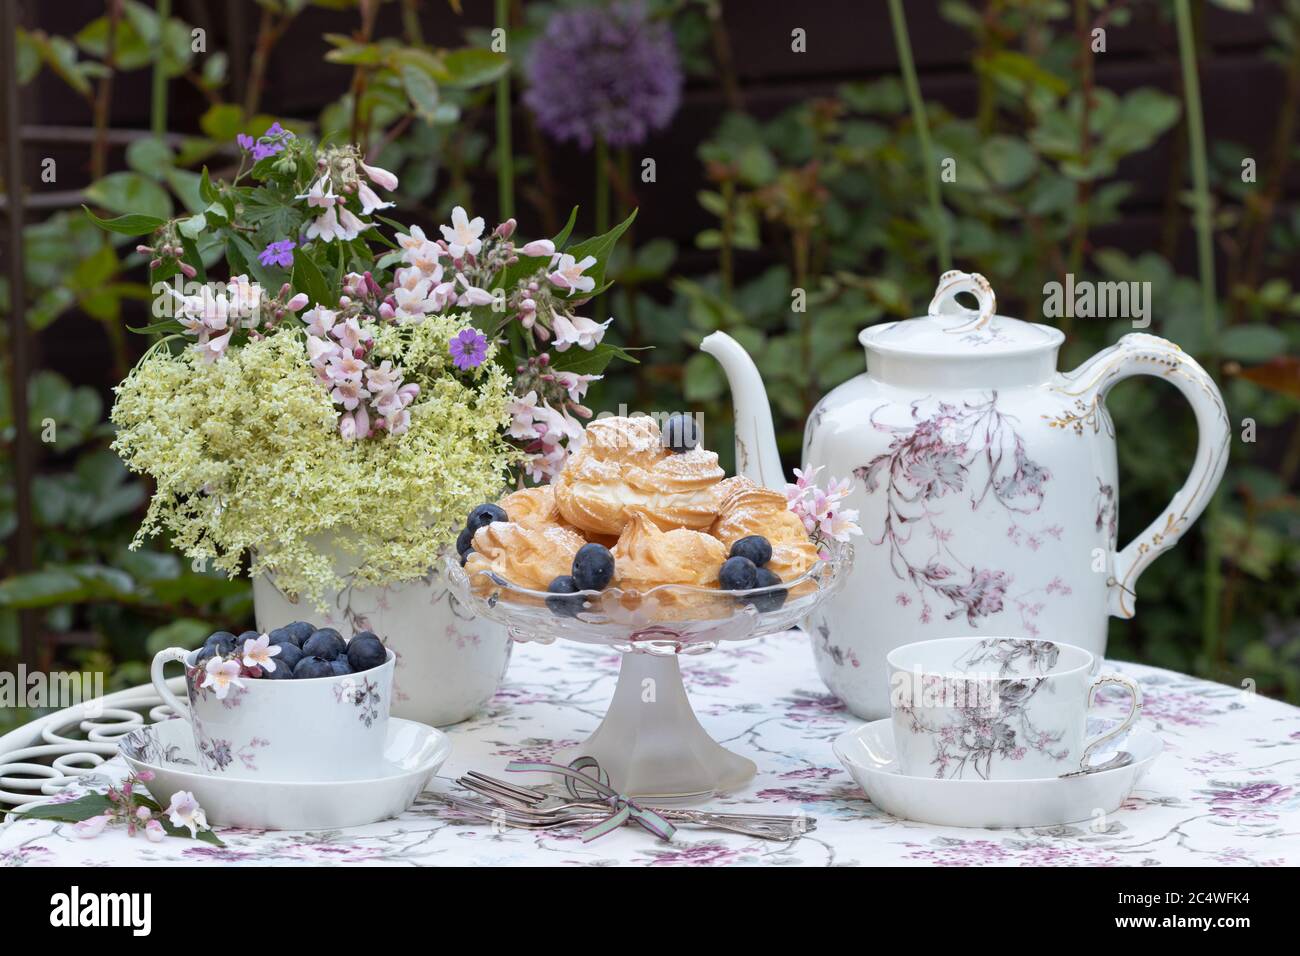 table decoration with cream puffs, blueberries and vintage porcelain Stock Photo